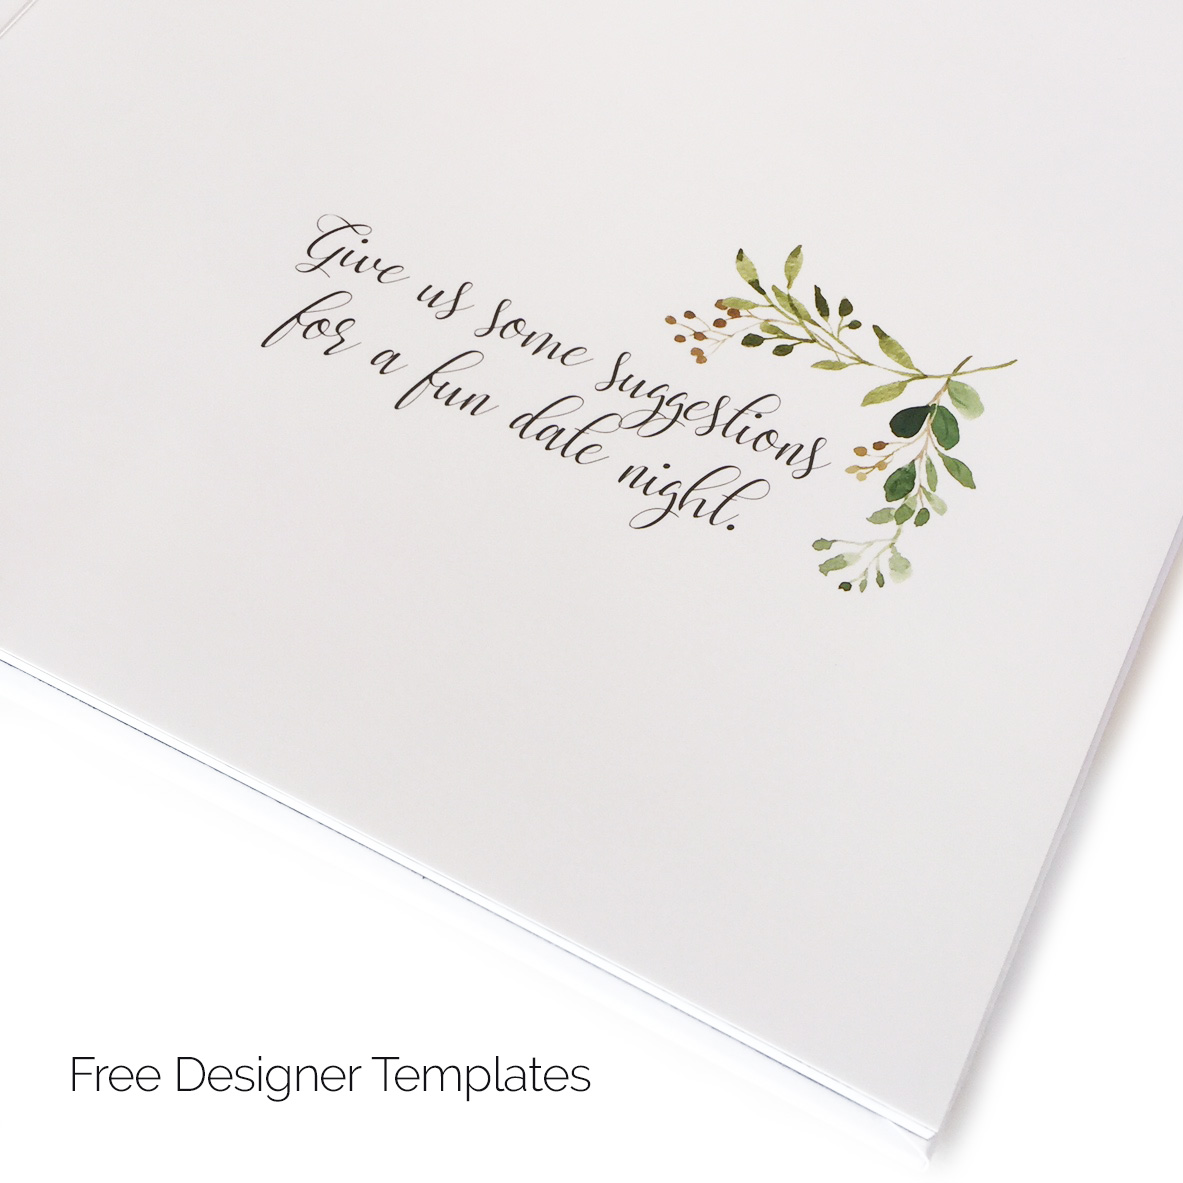 Free wedding guest book templates with artistic touches